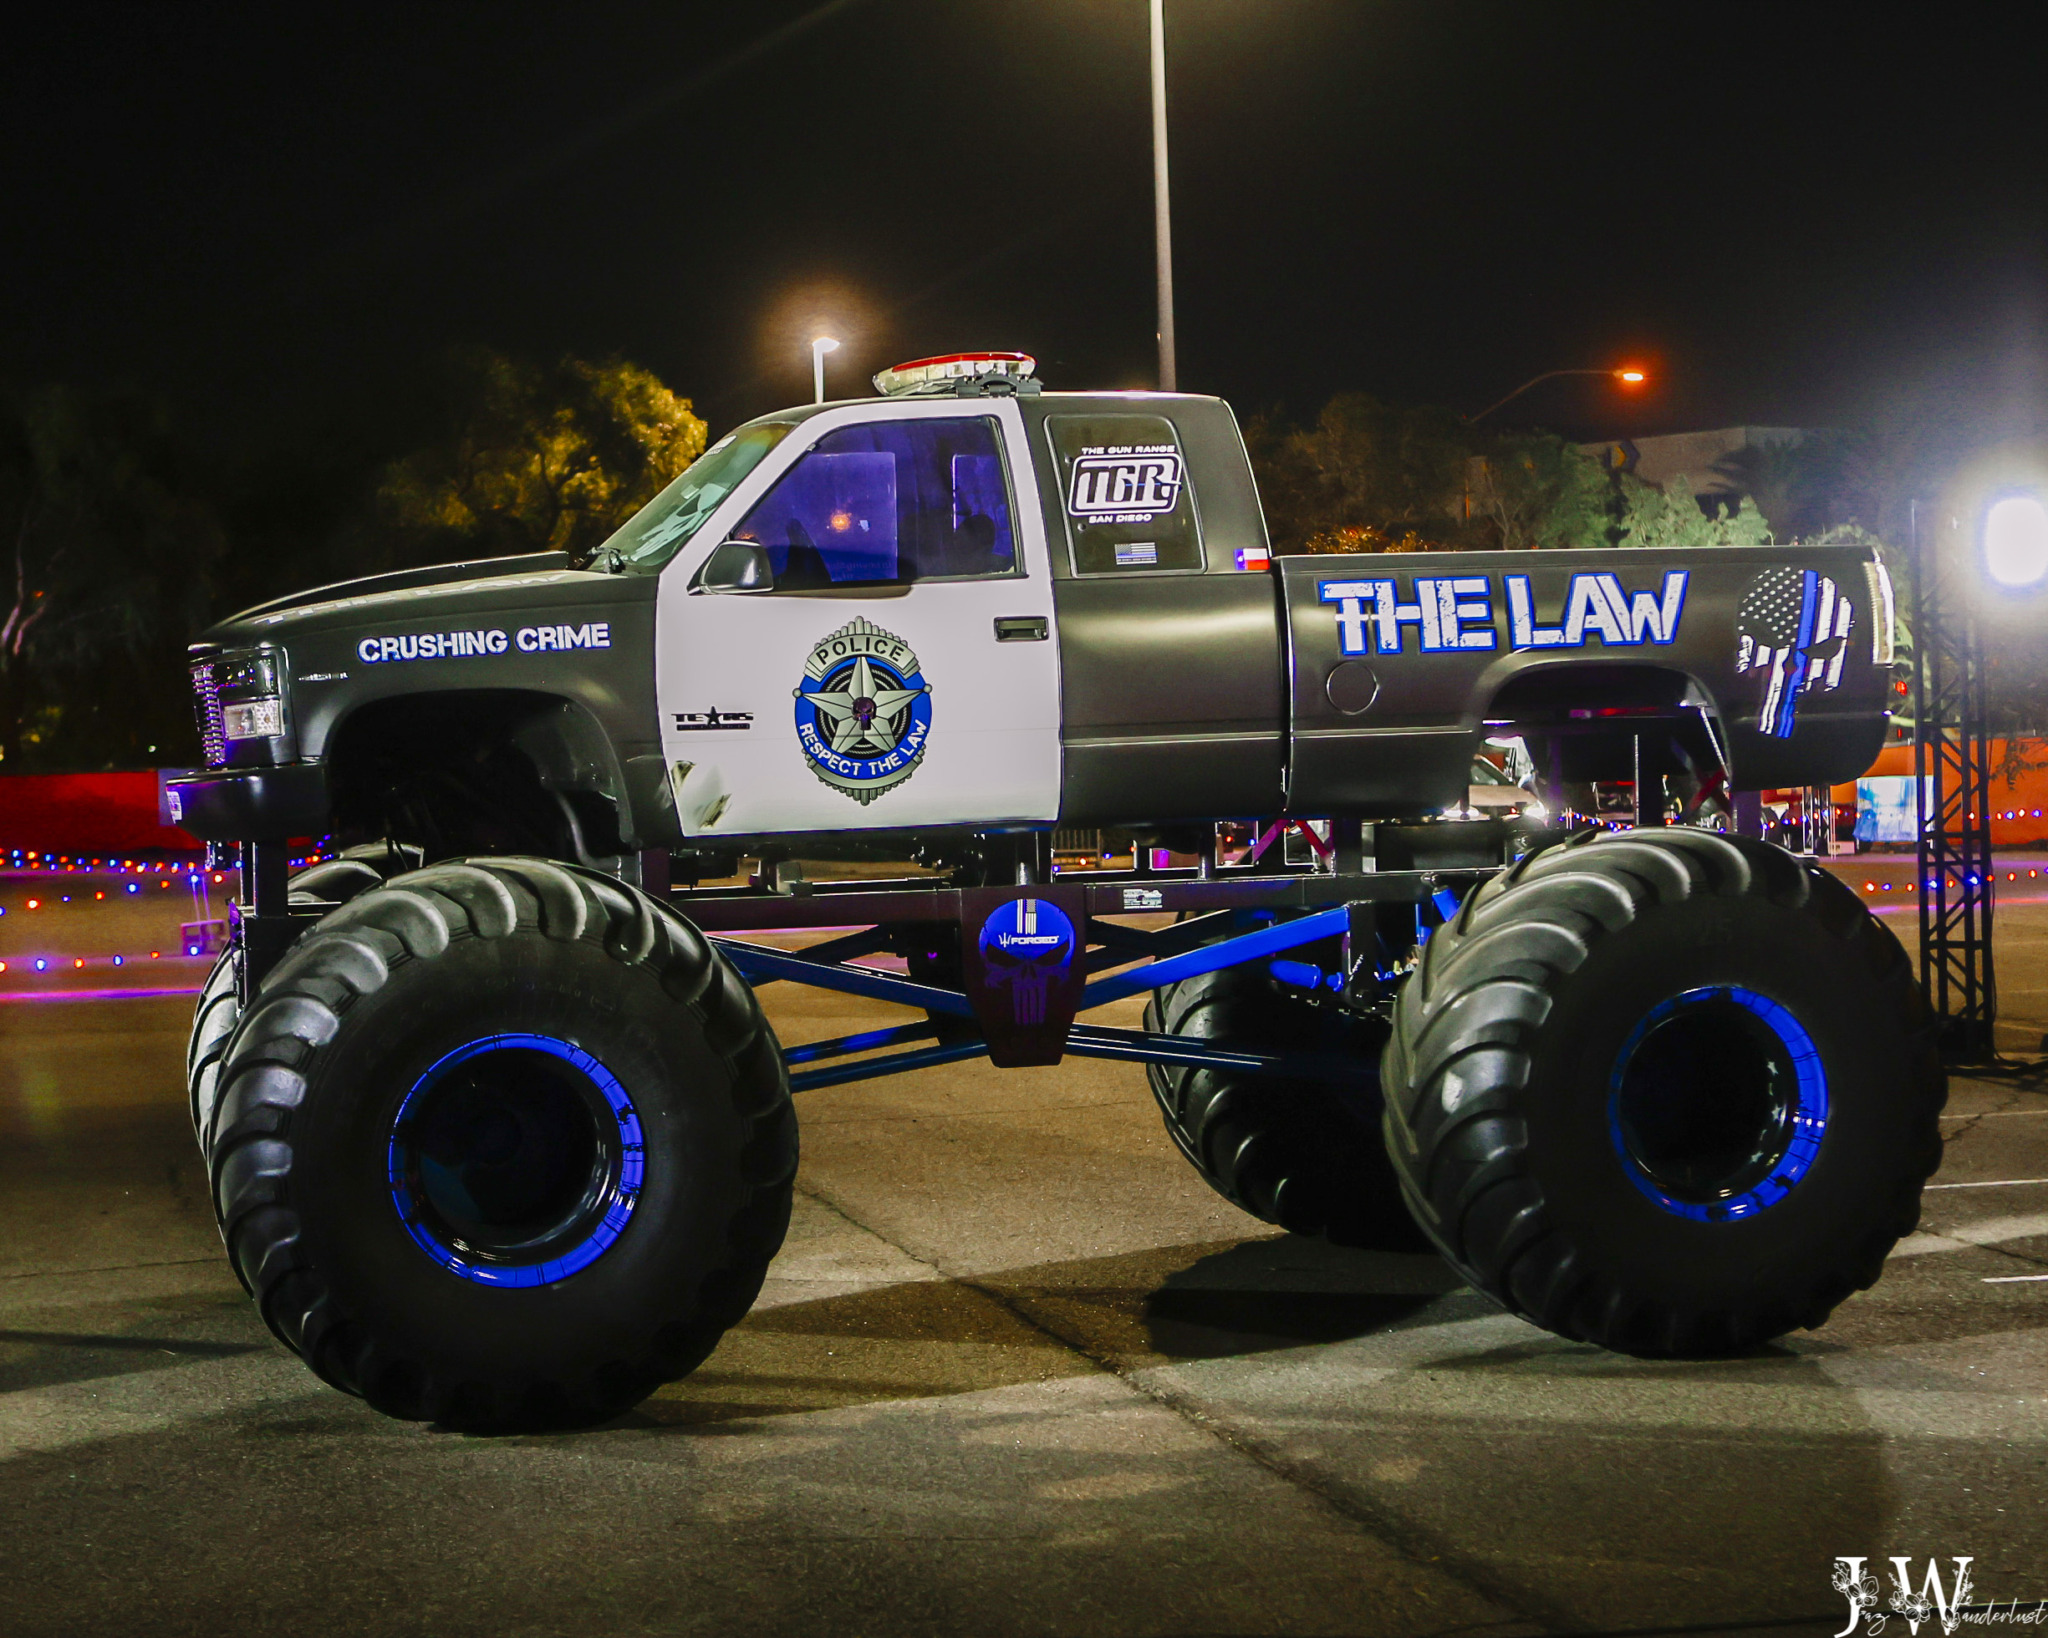 Hot Wheels Ultimate Drive-thru event in Southern California. Photography by Jaz Wanderlust.